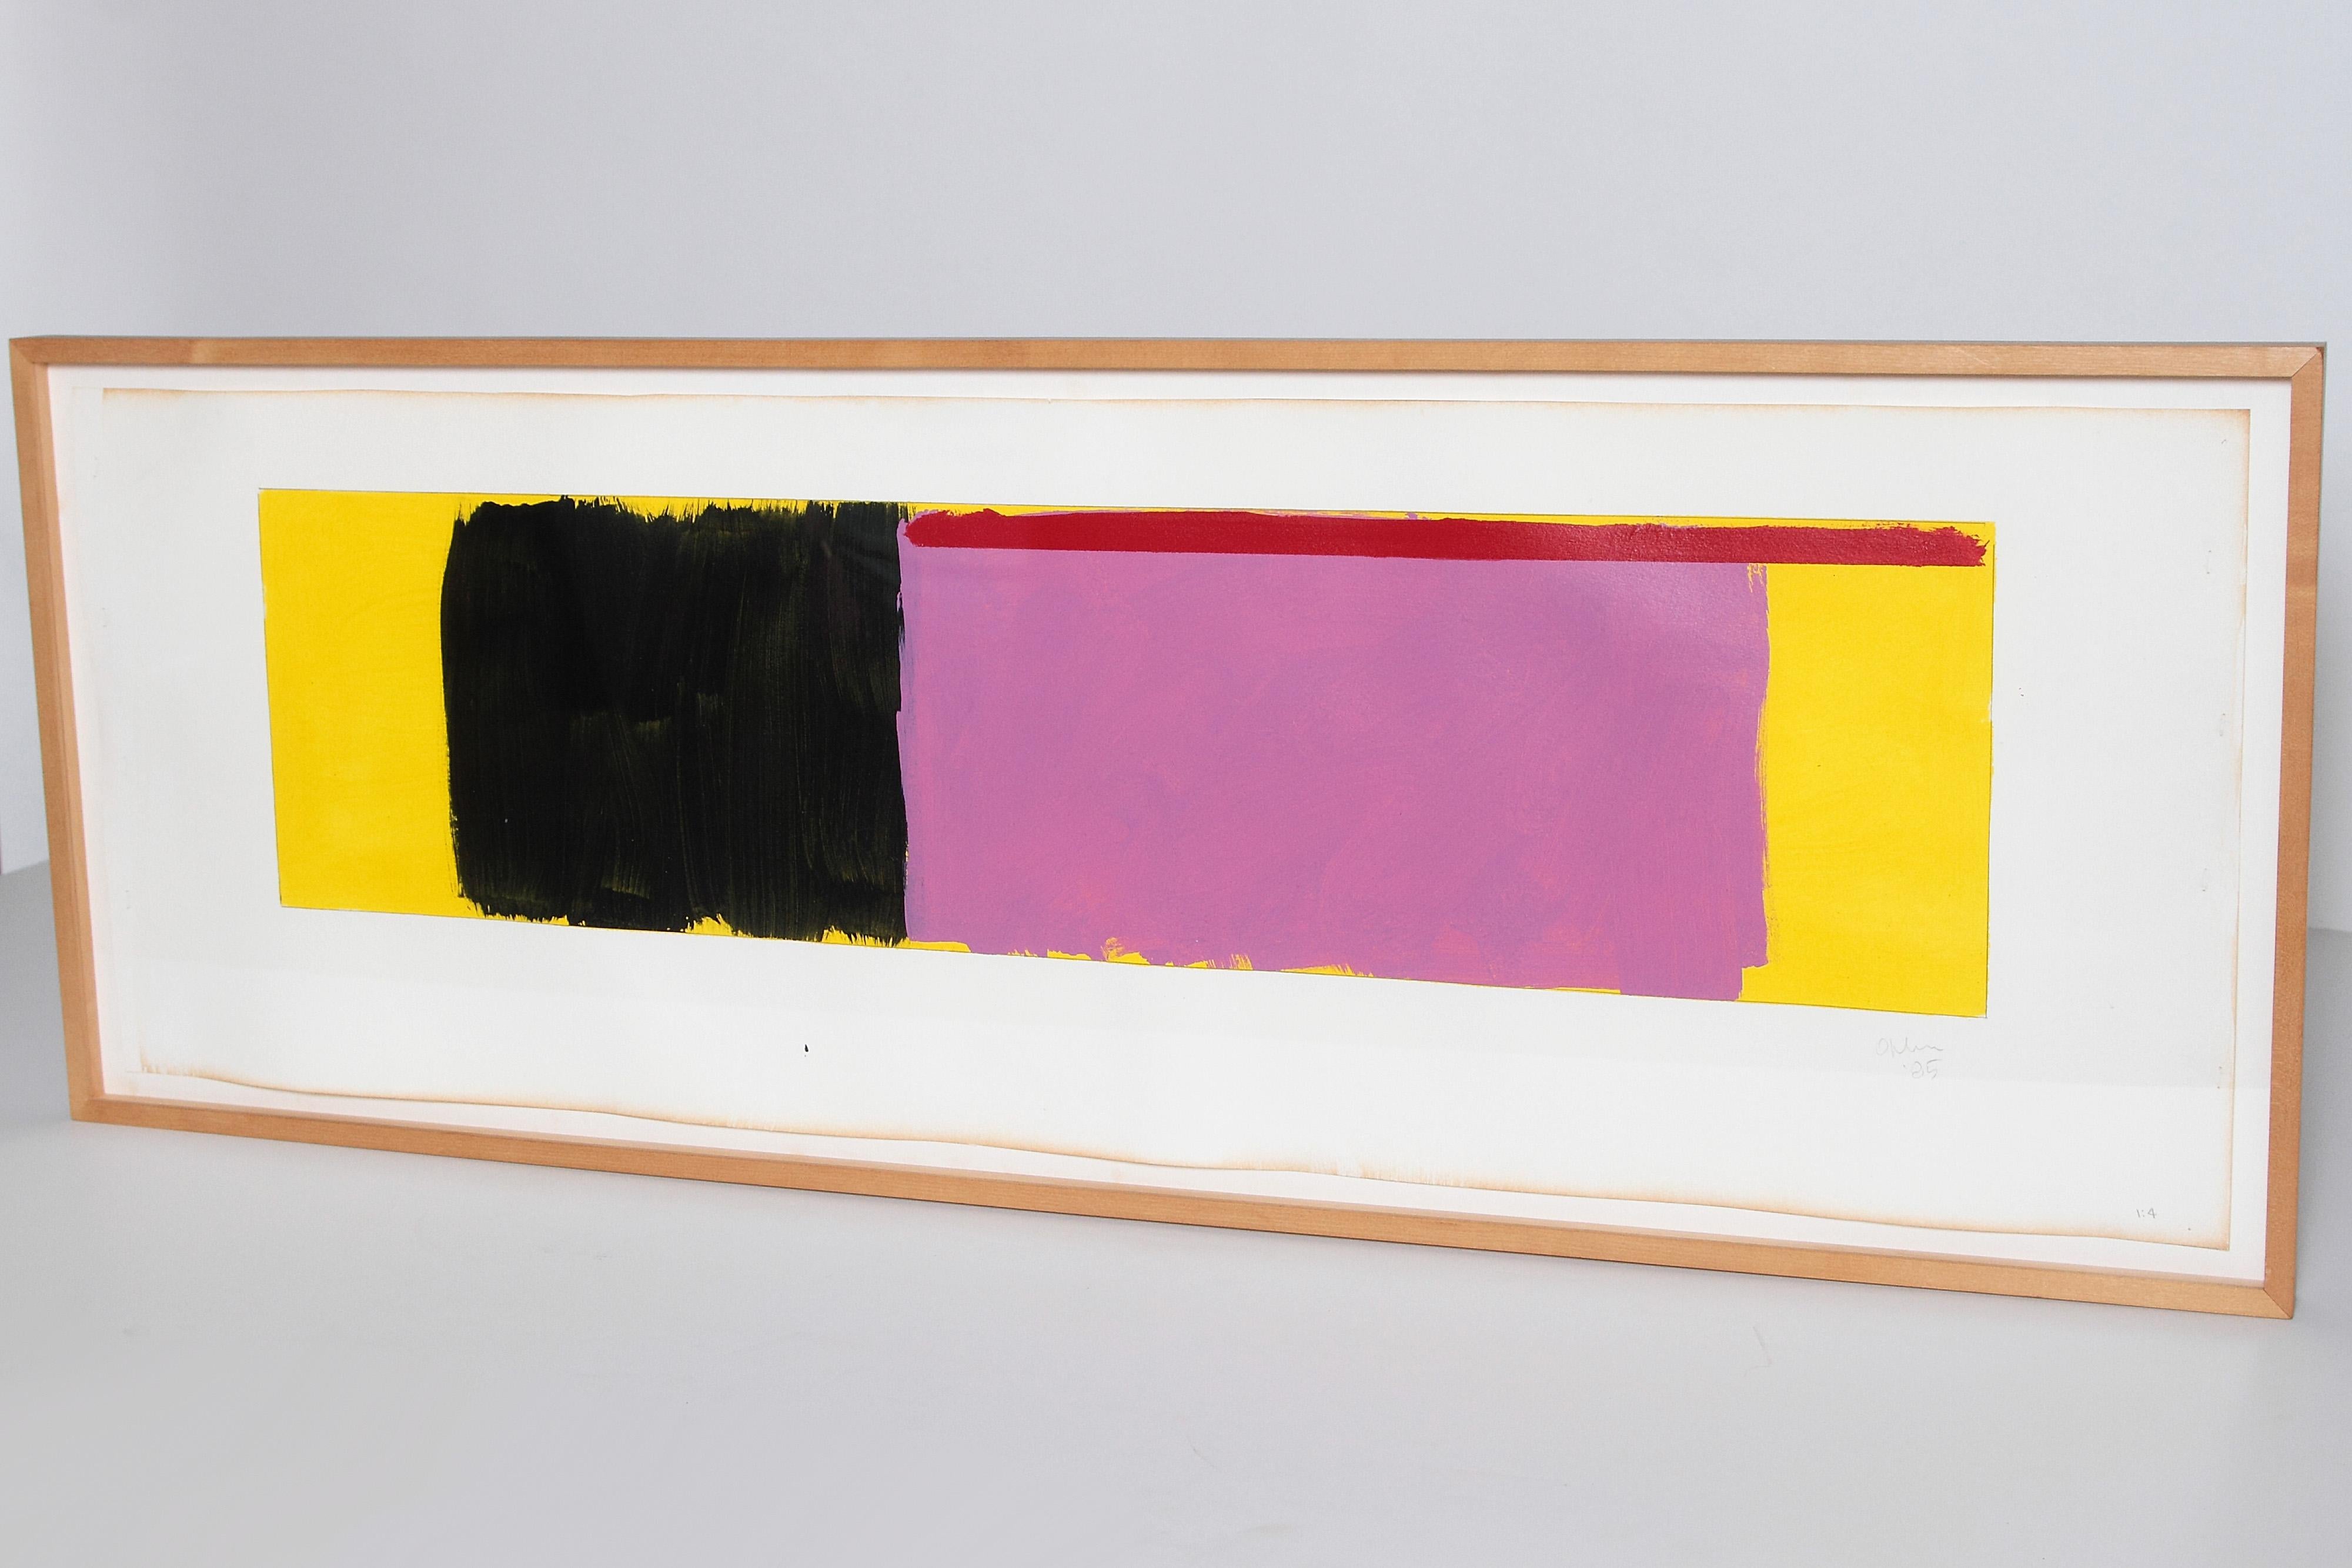 An original Minimalist oil painting on paper by Doug Ohlson, 1936-2010. Doug Ohlson was an American abstract artist who specialized in geometric patterns and vivid colors. The artwork depicts a vibrant yellow background with black, purple and red